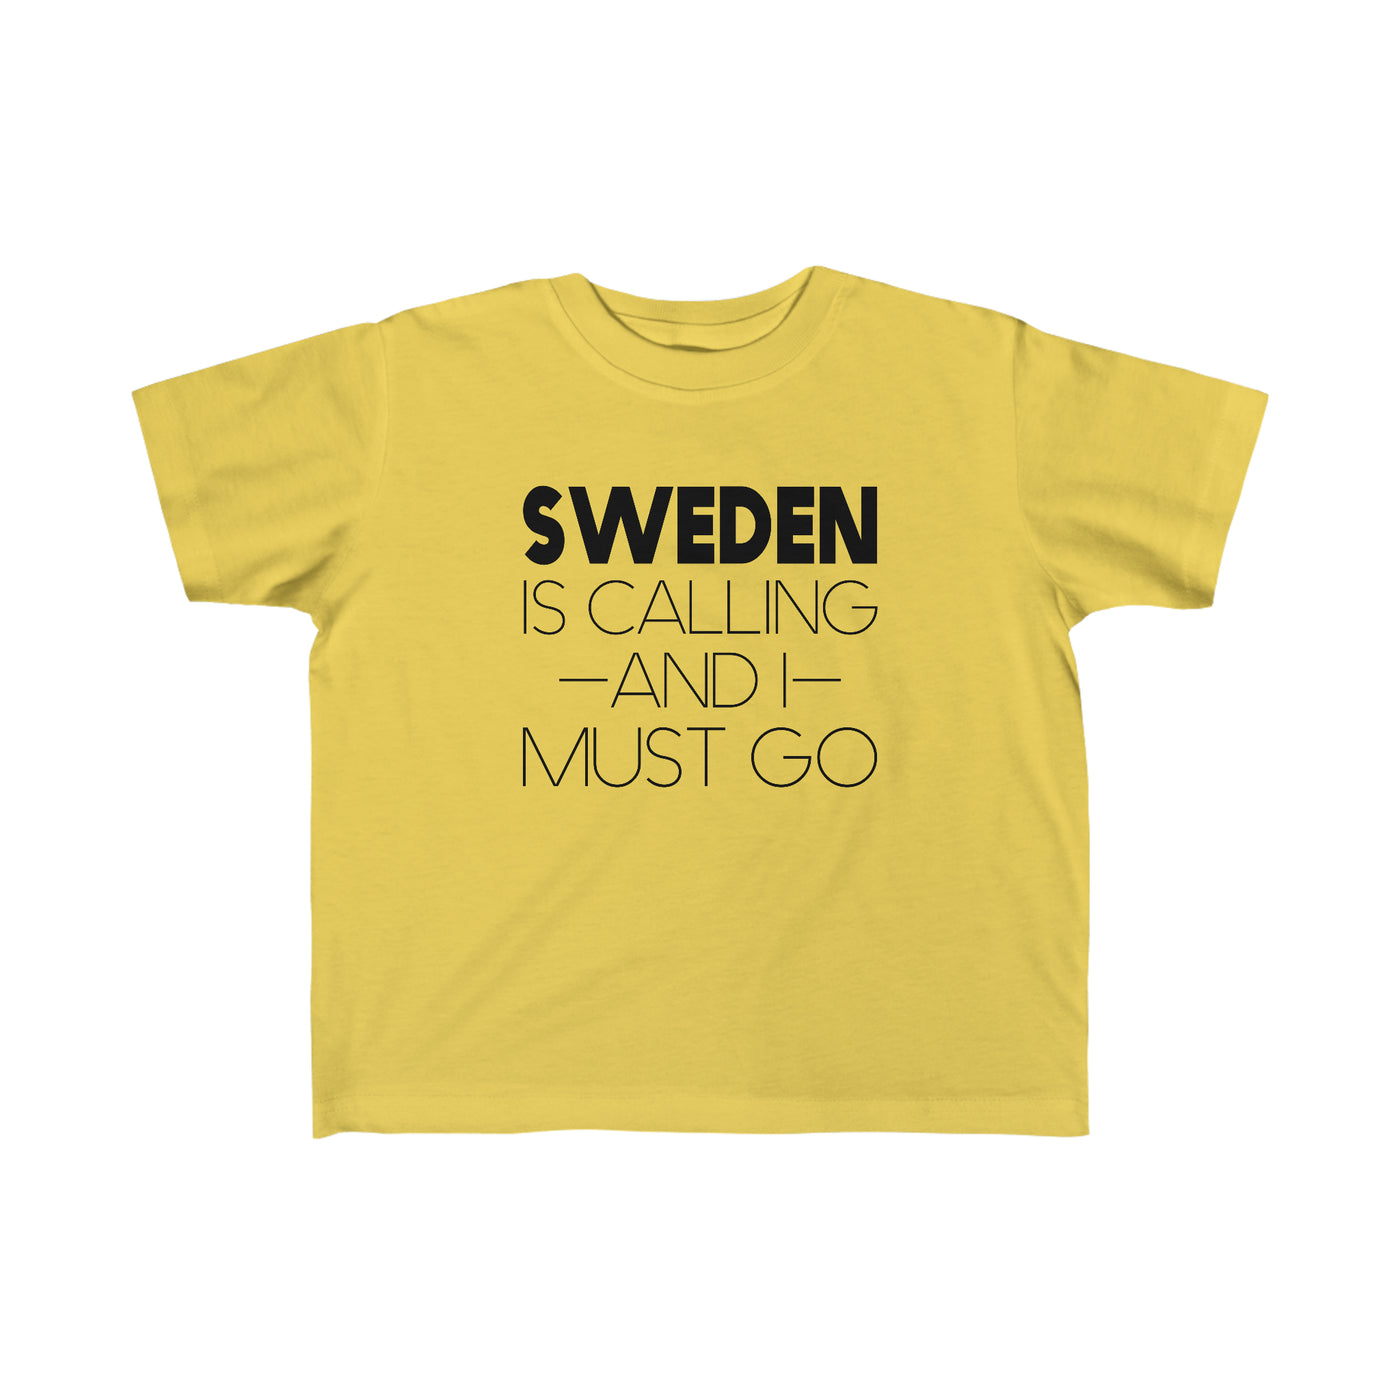 Sweden Is Calling And I Must Go Toddler Tee